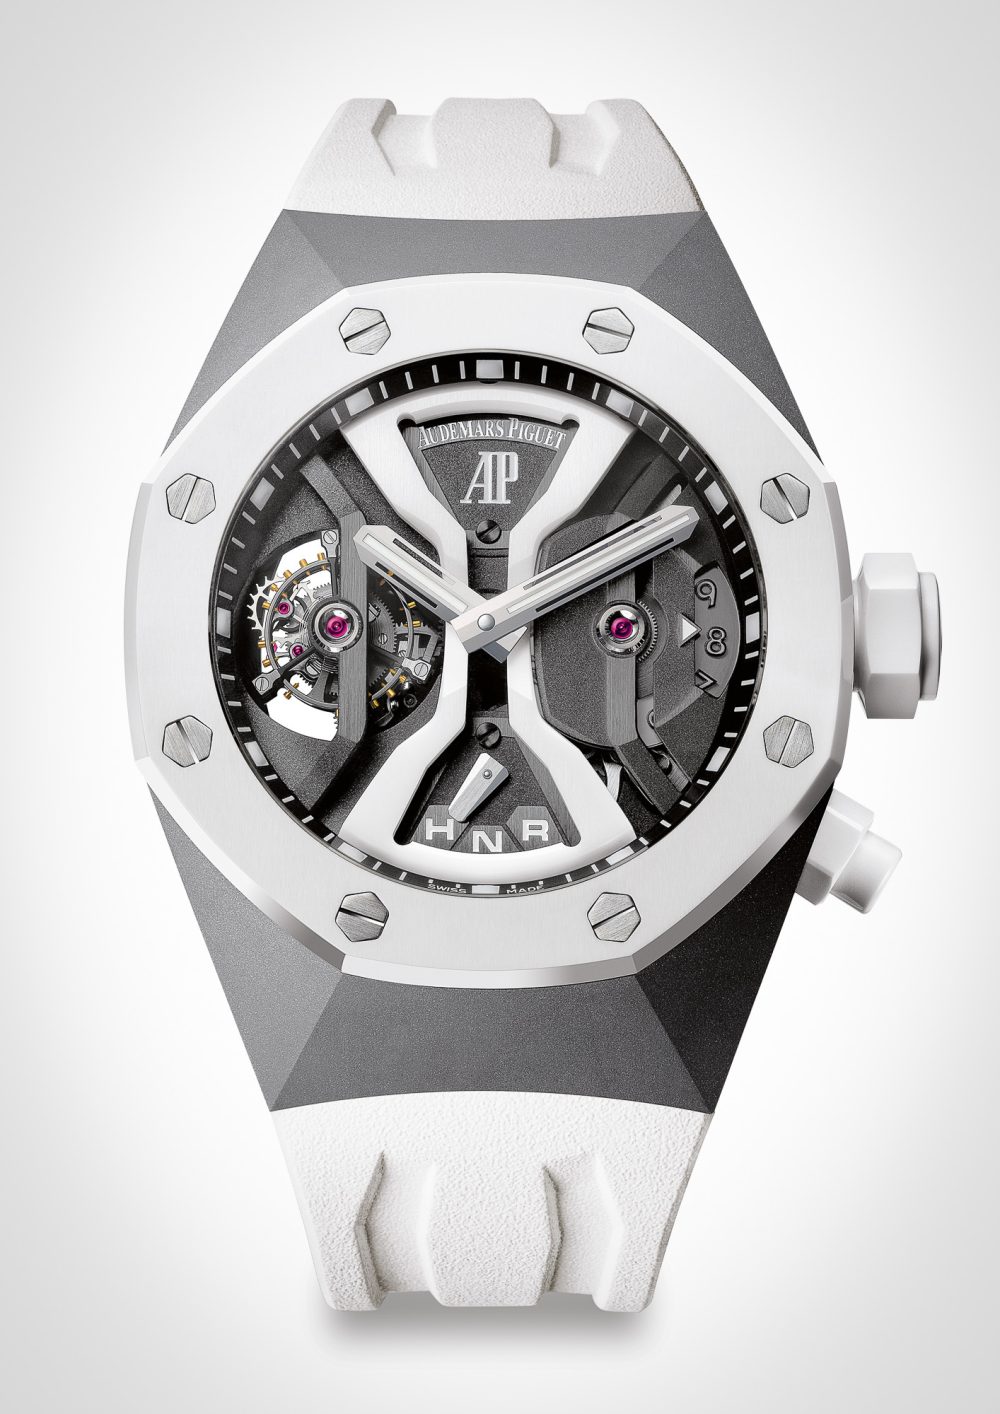 Which Audemars Piguet collection showcases avant-garde and innovative designs?